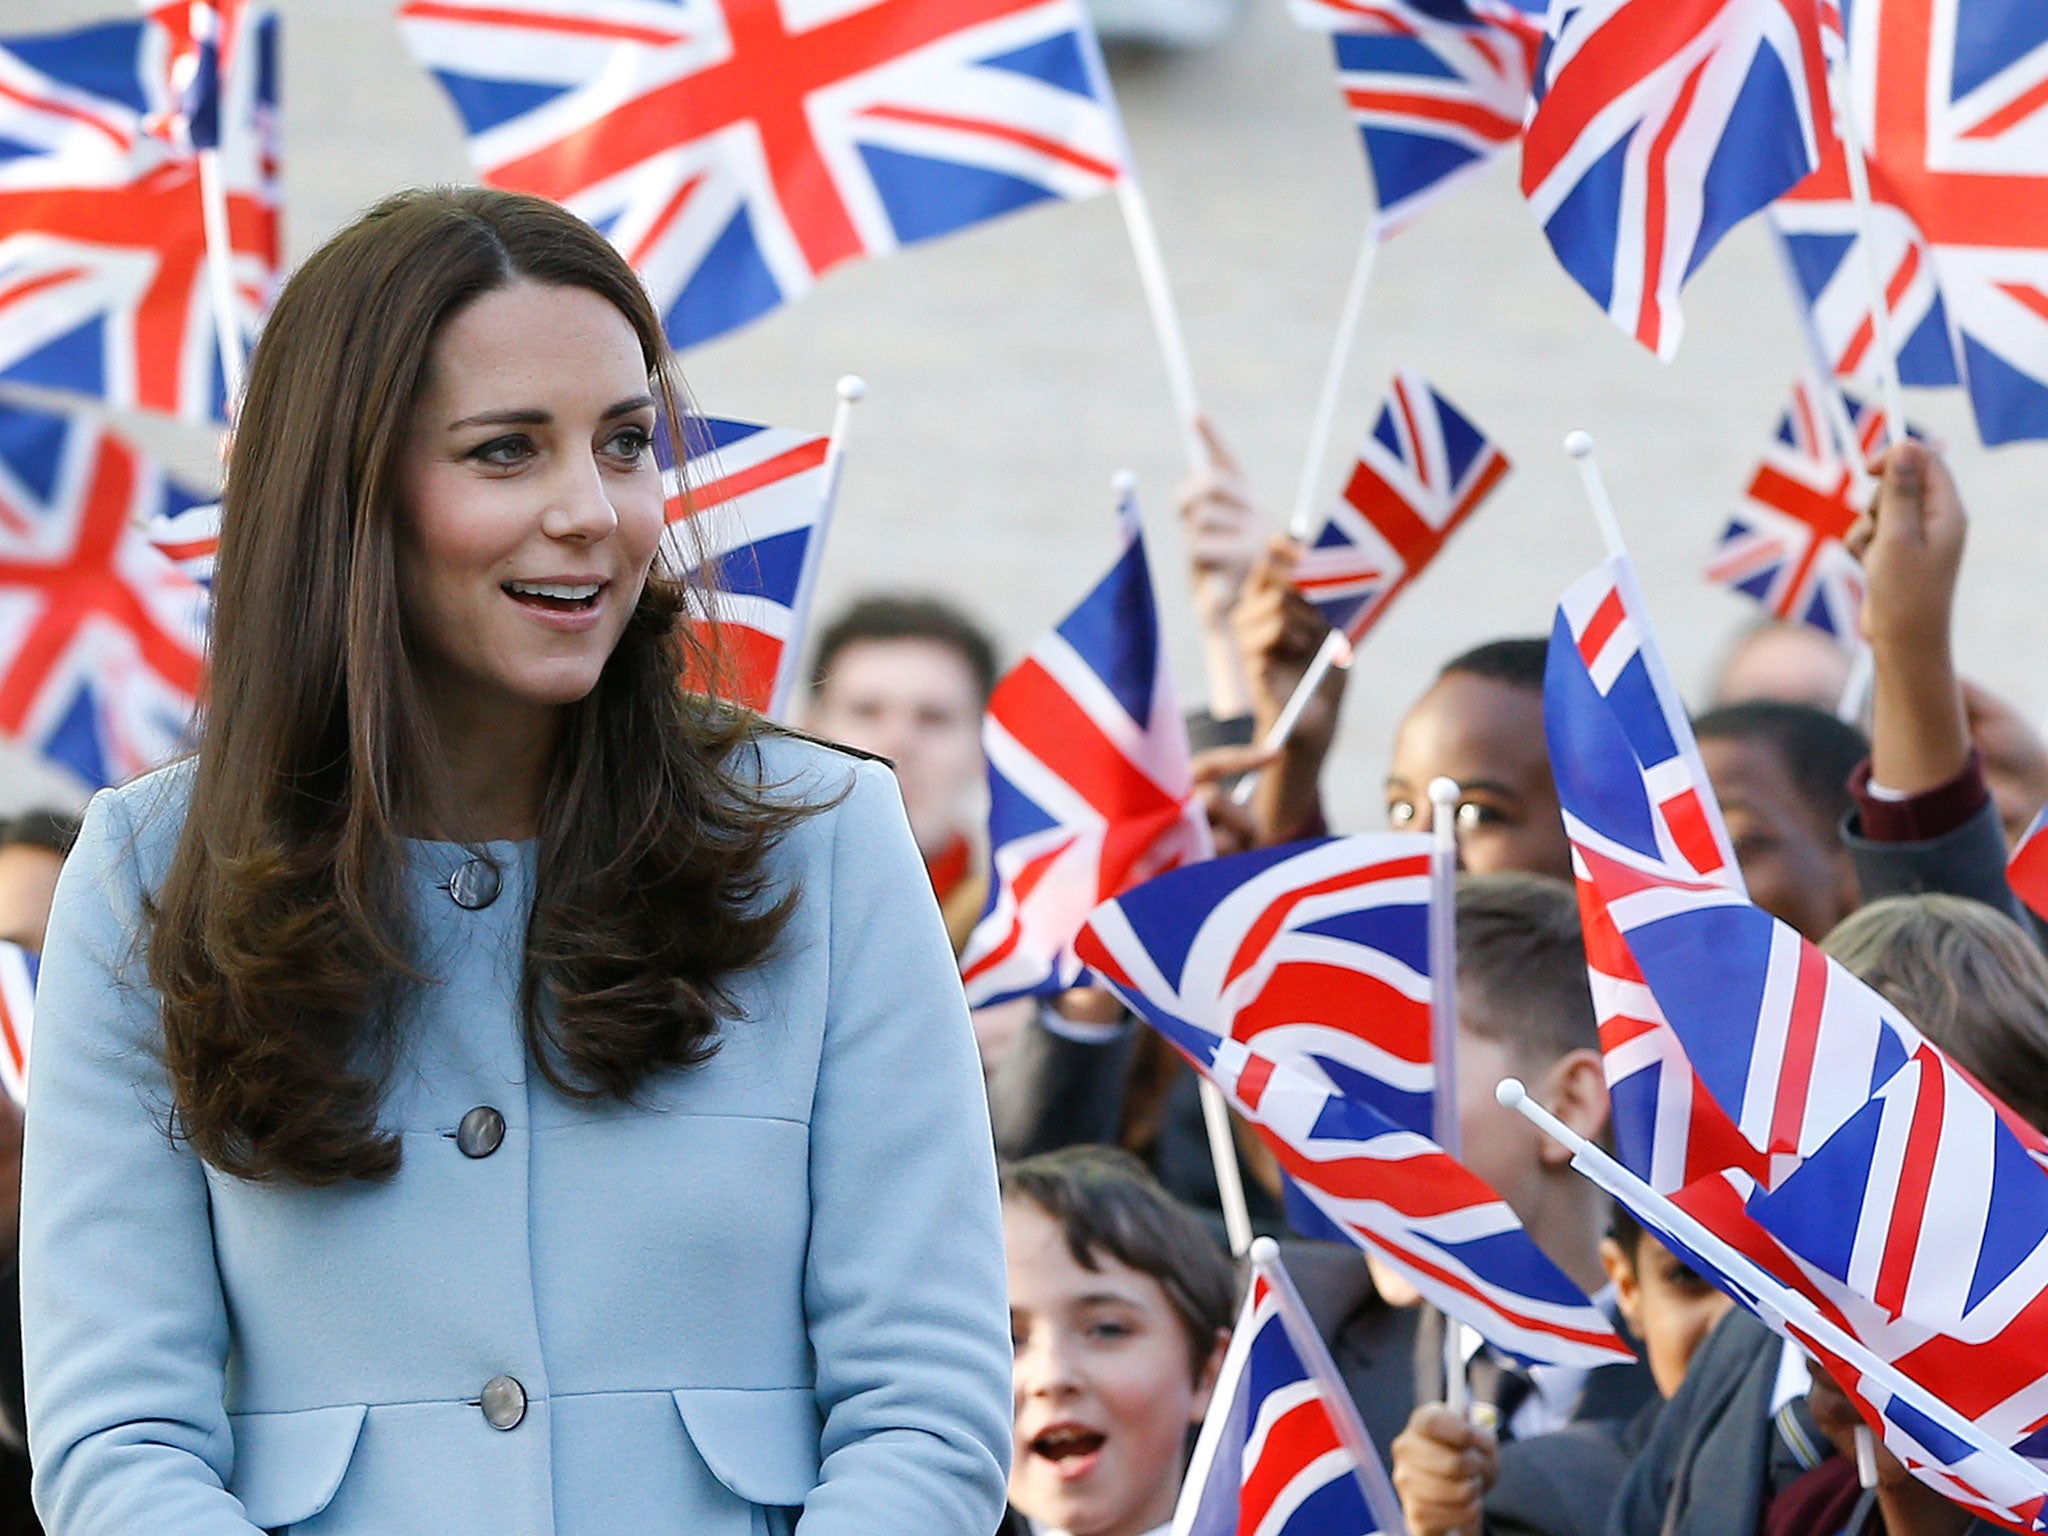 Britain's Kate, the Duchess of Cambridge walks past pupils with flags during a visit to formally open Kensington Aldridge Academy in London